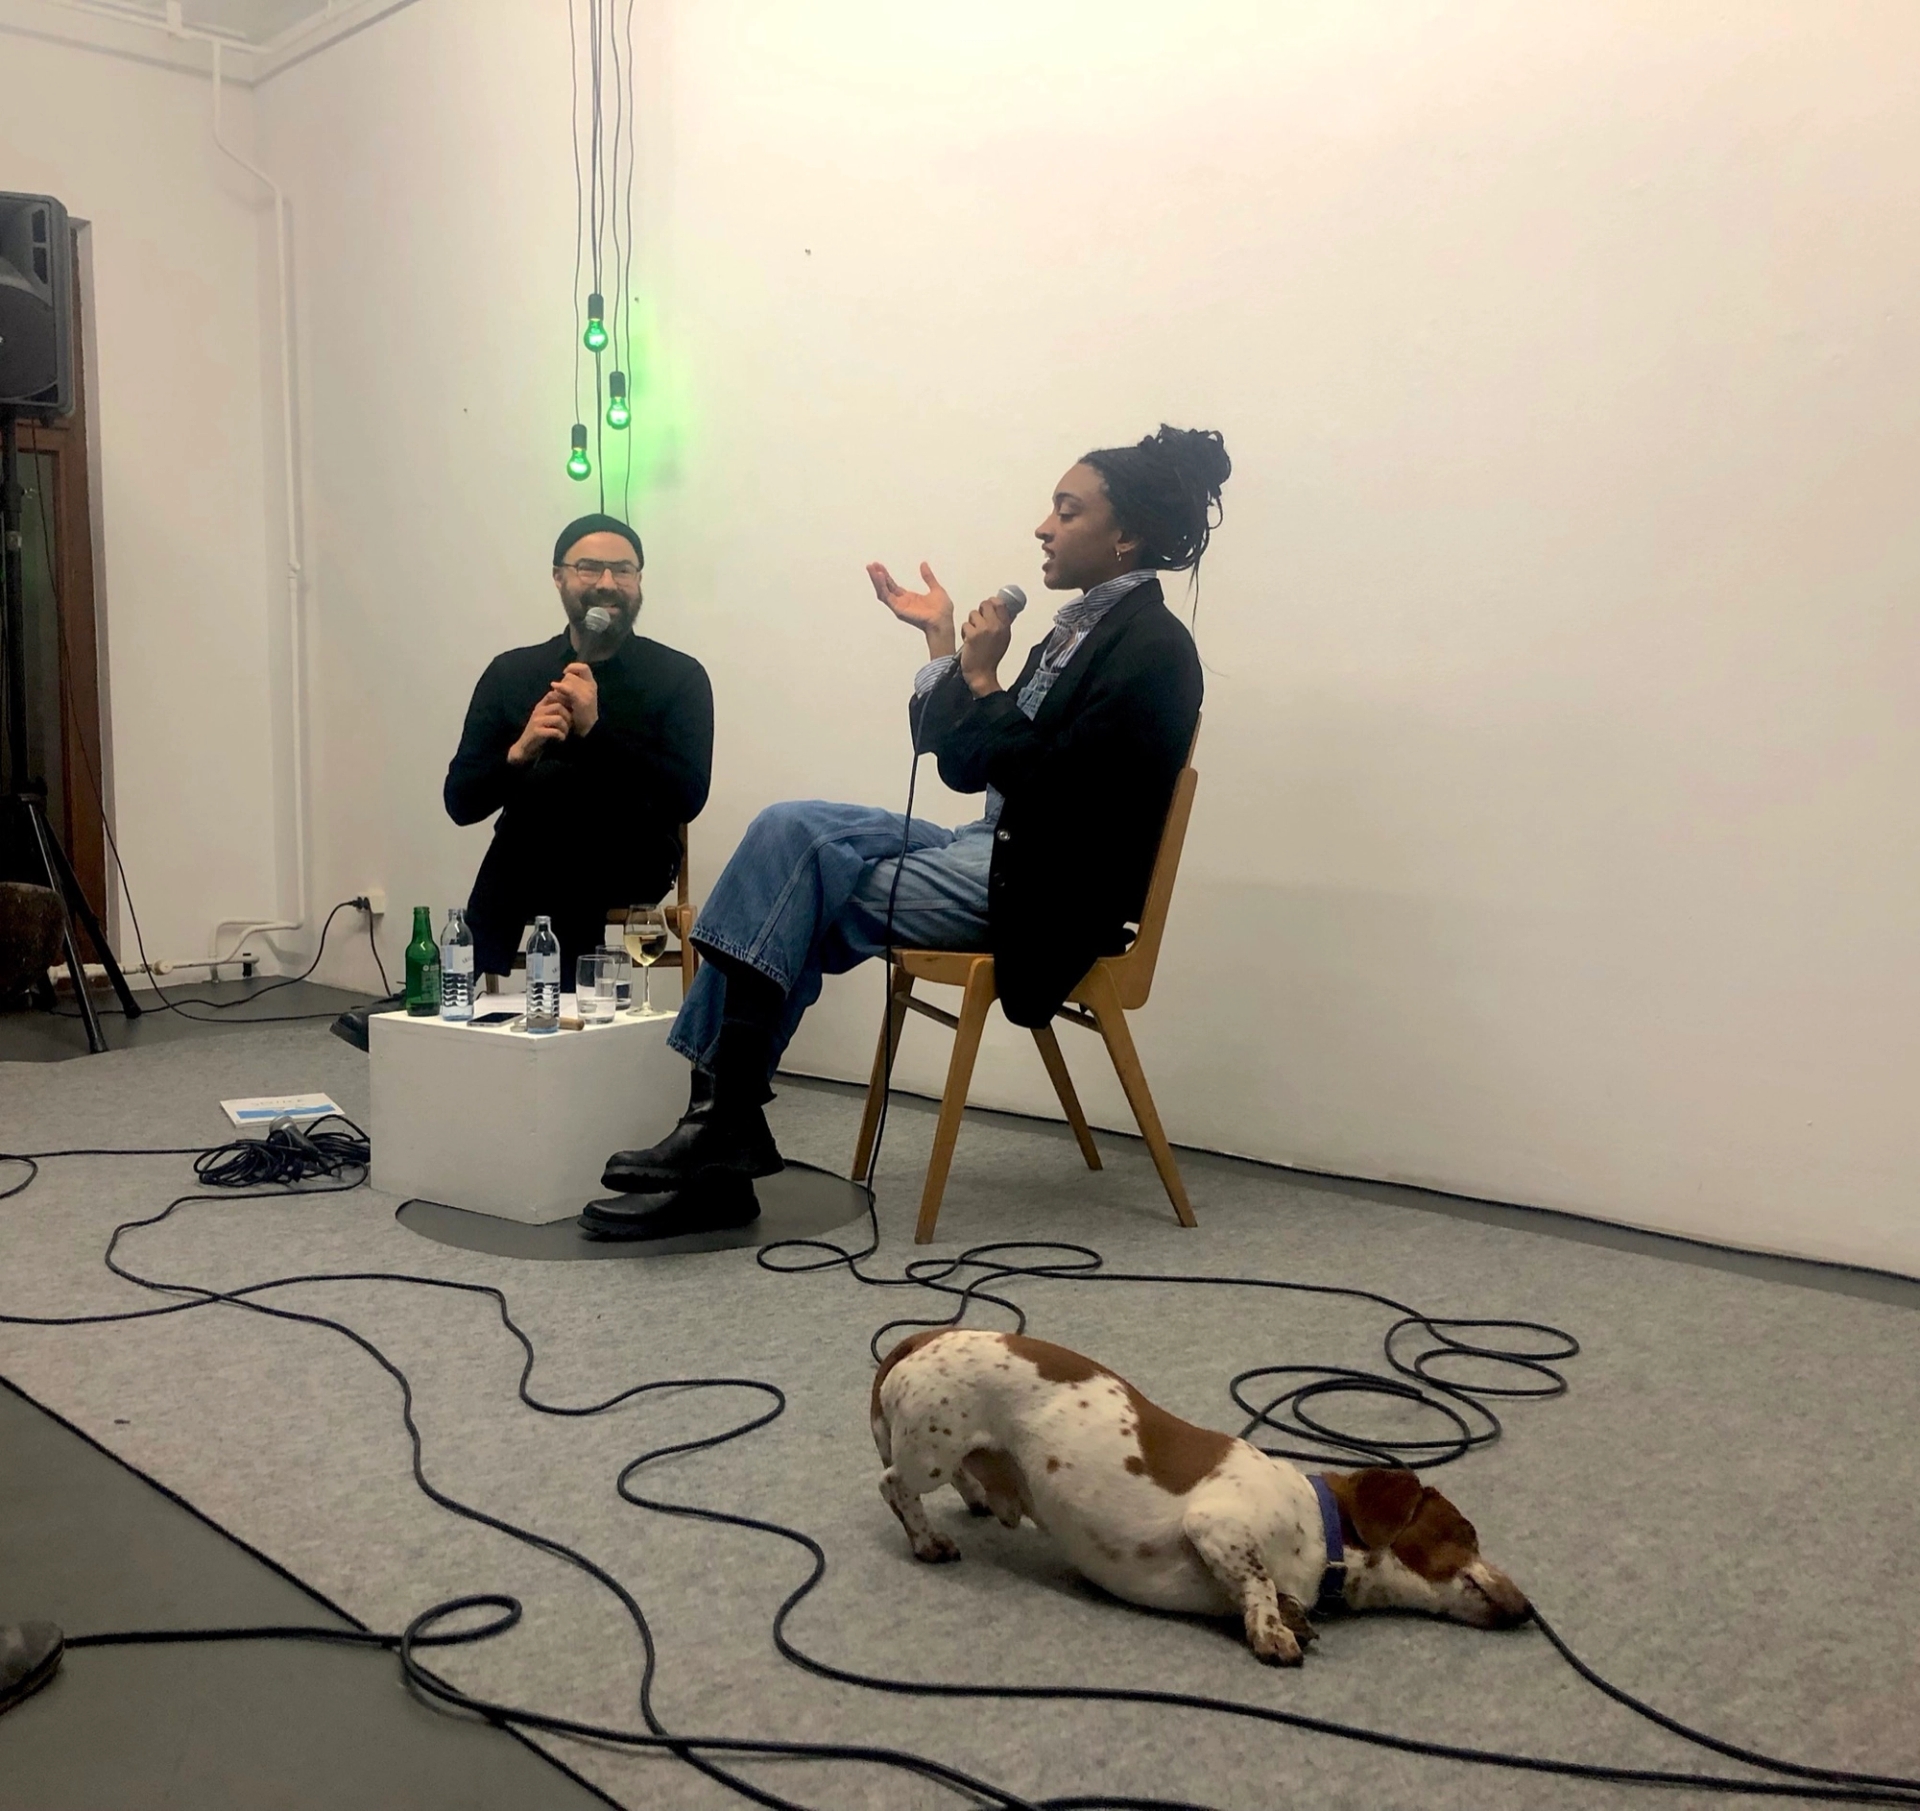 Aria Dean in conversation with Colin Lang, hosted by Spike Art Magazine. January 28, 2020.